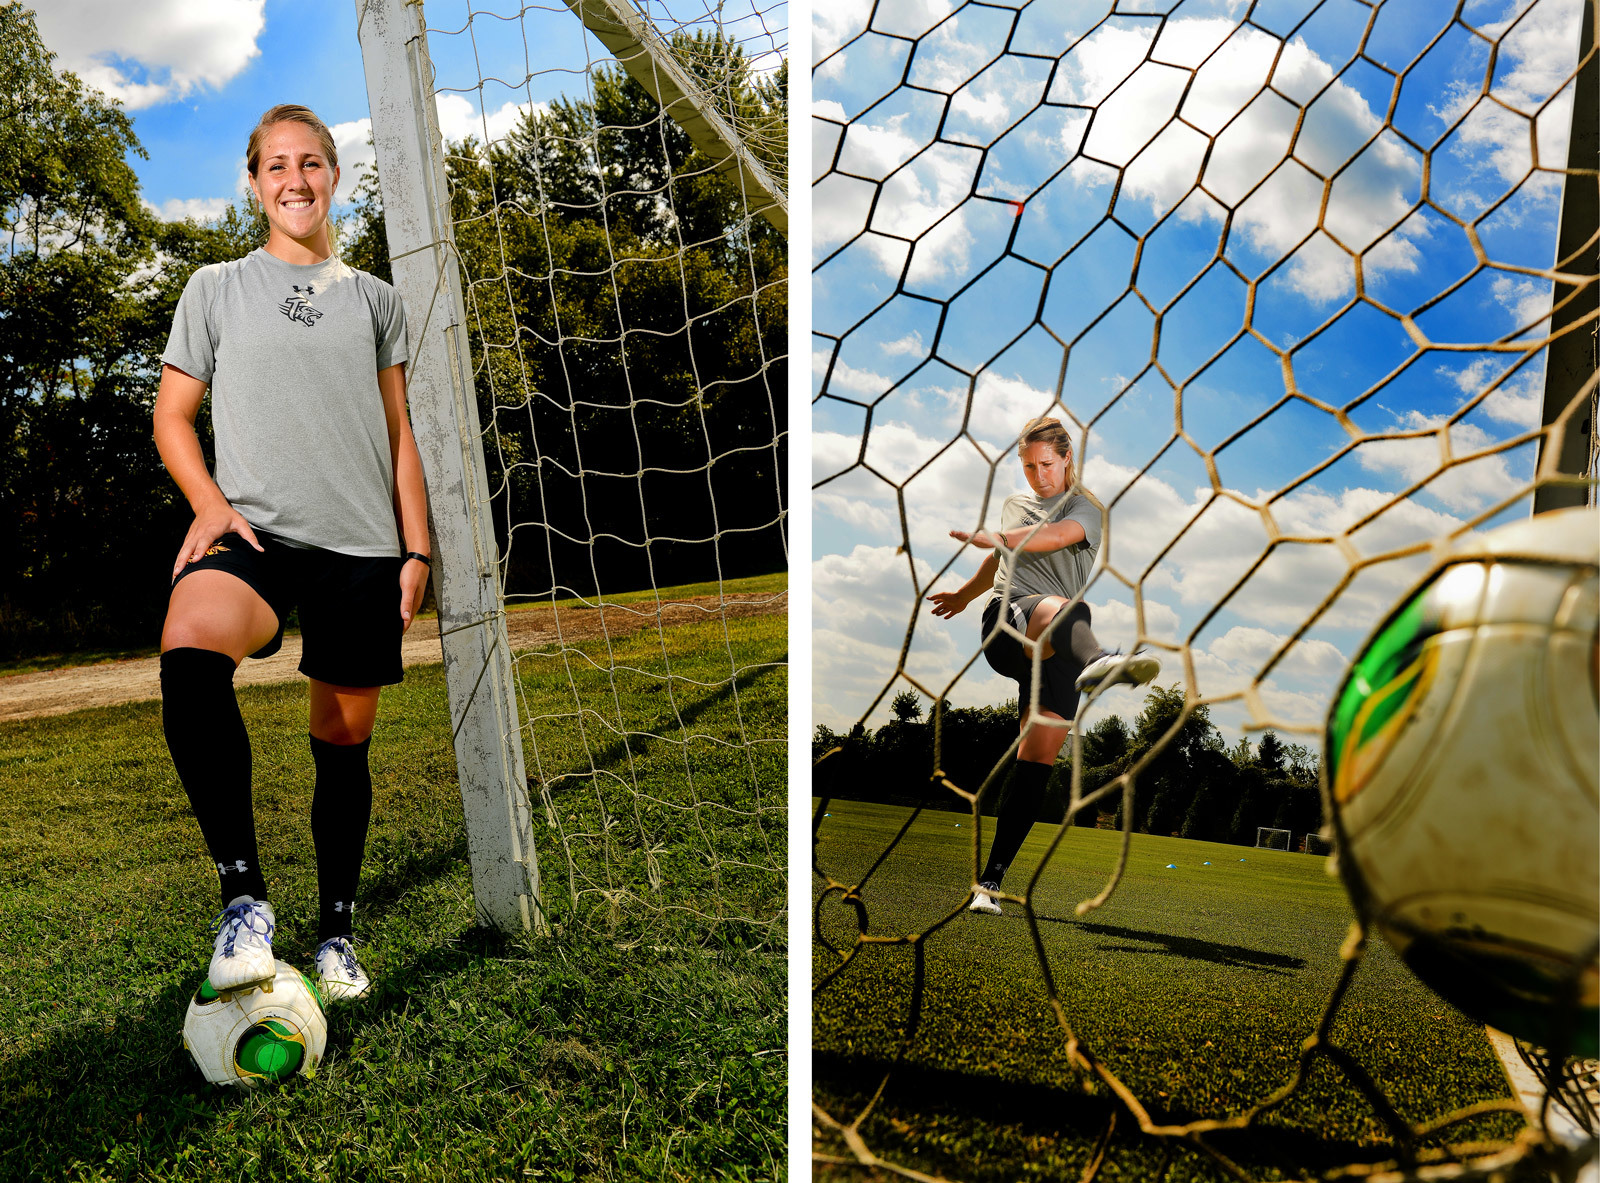  Towson University women's soccer forward Emily Banes poses during practice on Sept. 19, 2013 in Baltimore, Md.&nbsp; 